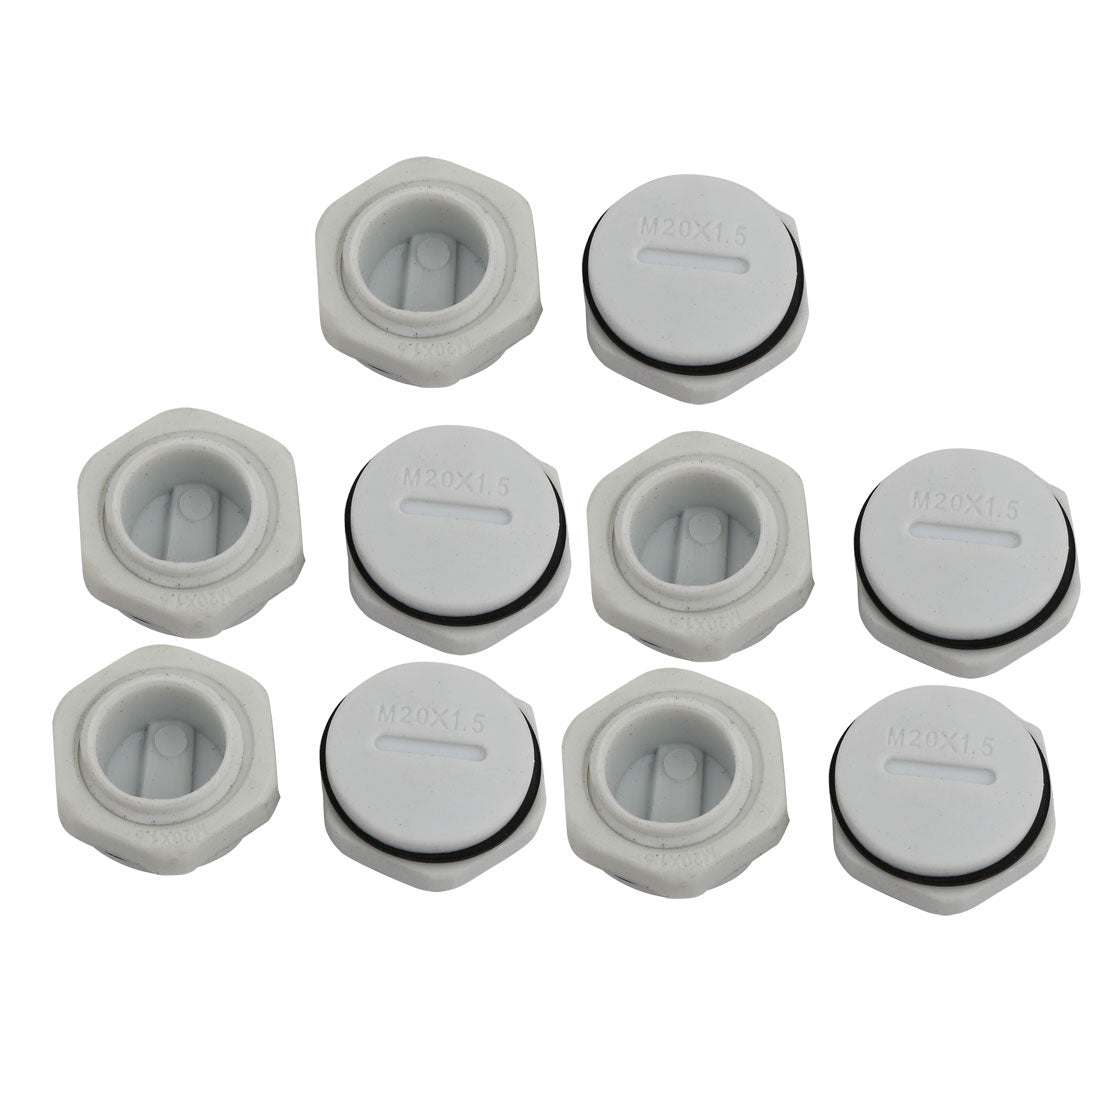 uxcell Uxcell 10pcs GLW-M20G Nylon Threaded Cable Gland Cap Round Screw-in Cover Gray w Washer